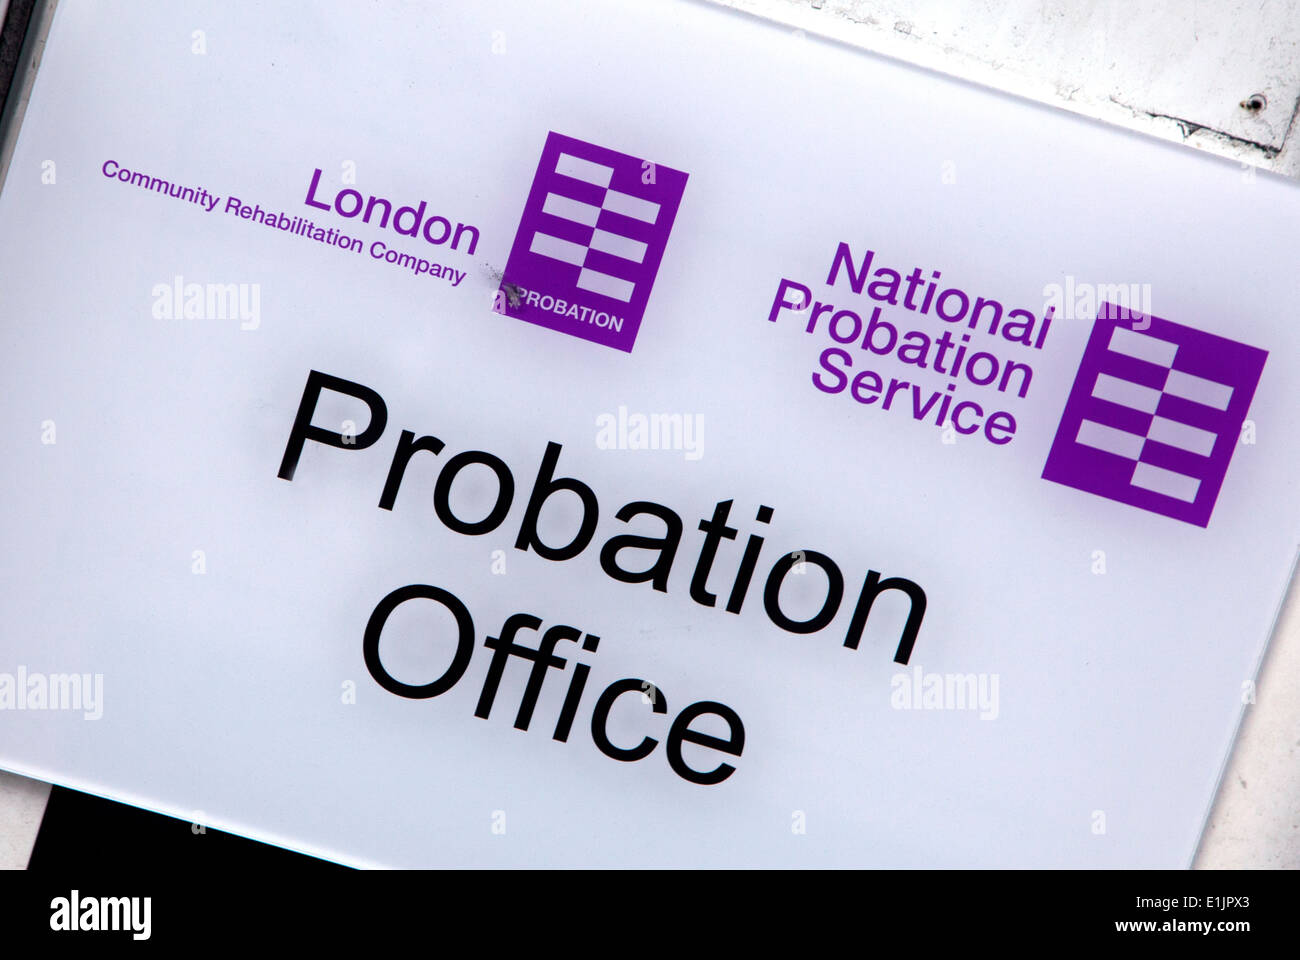 Sign on Probation Office in Bethnal Green, East London Stock Photo